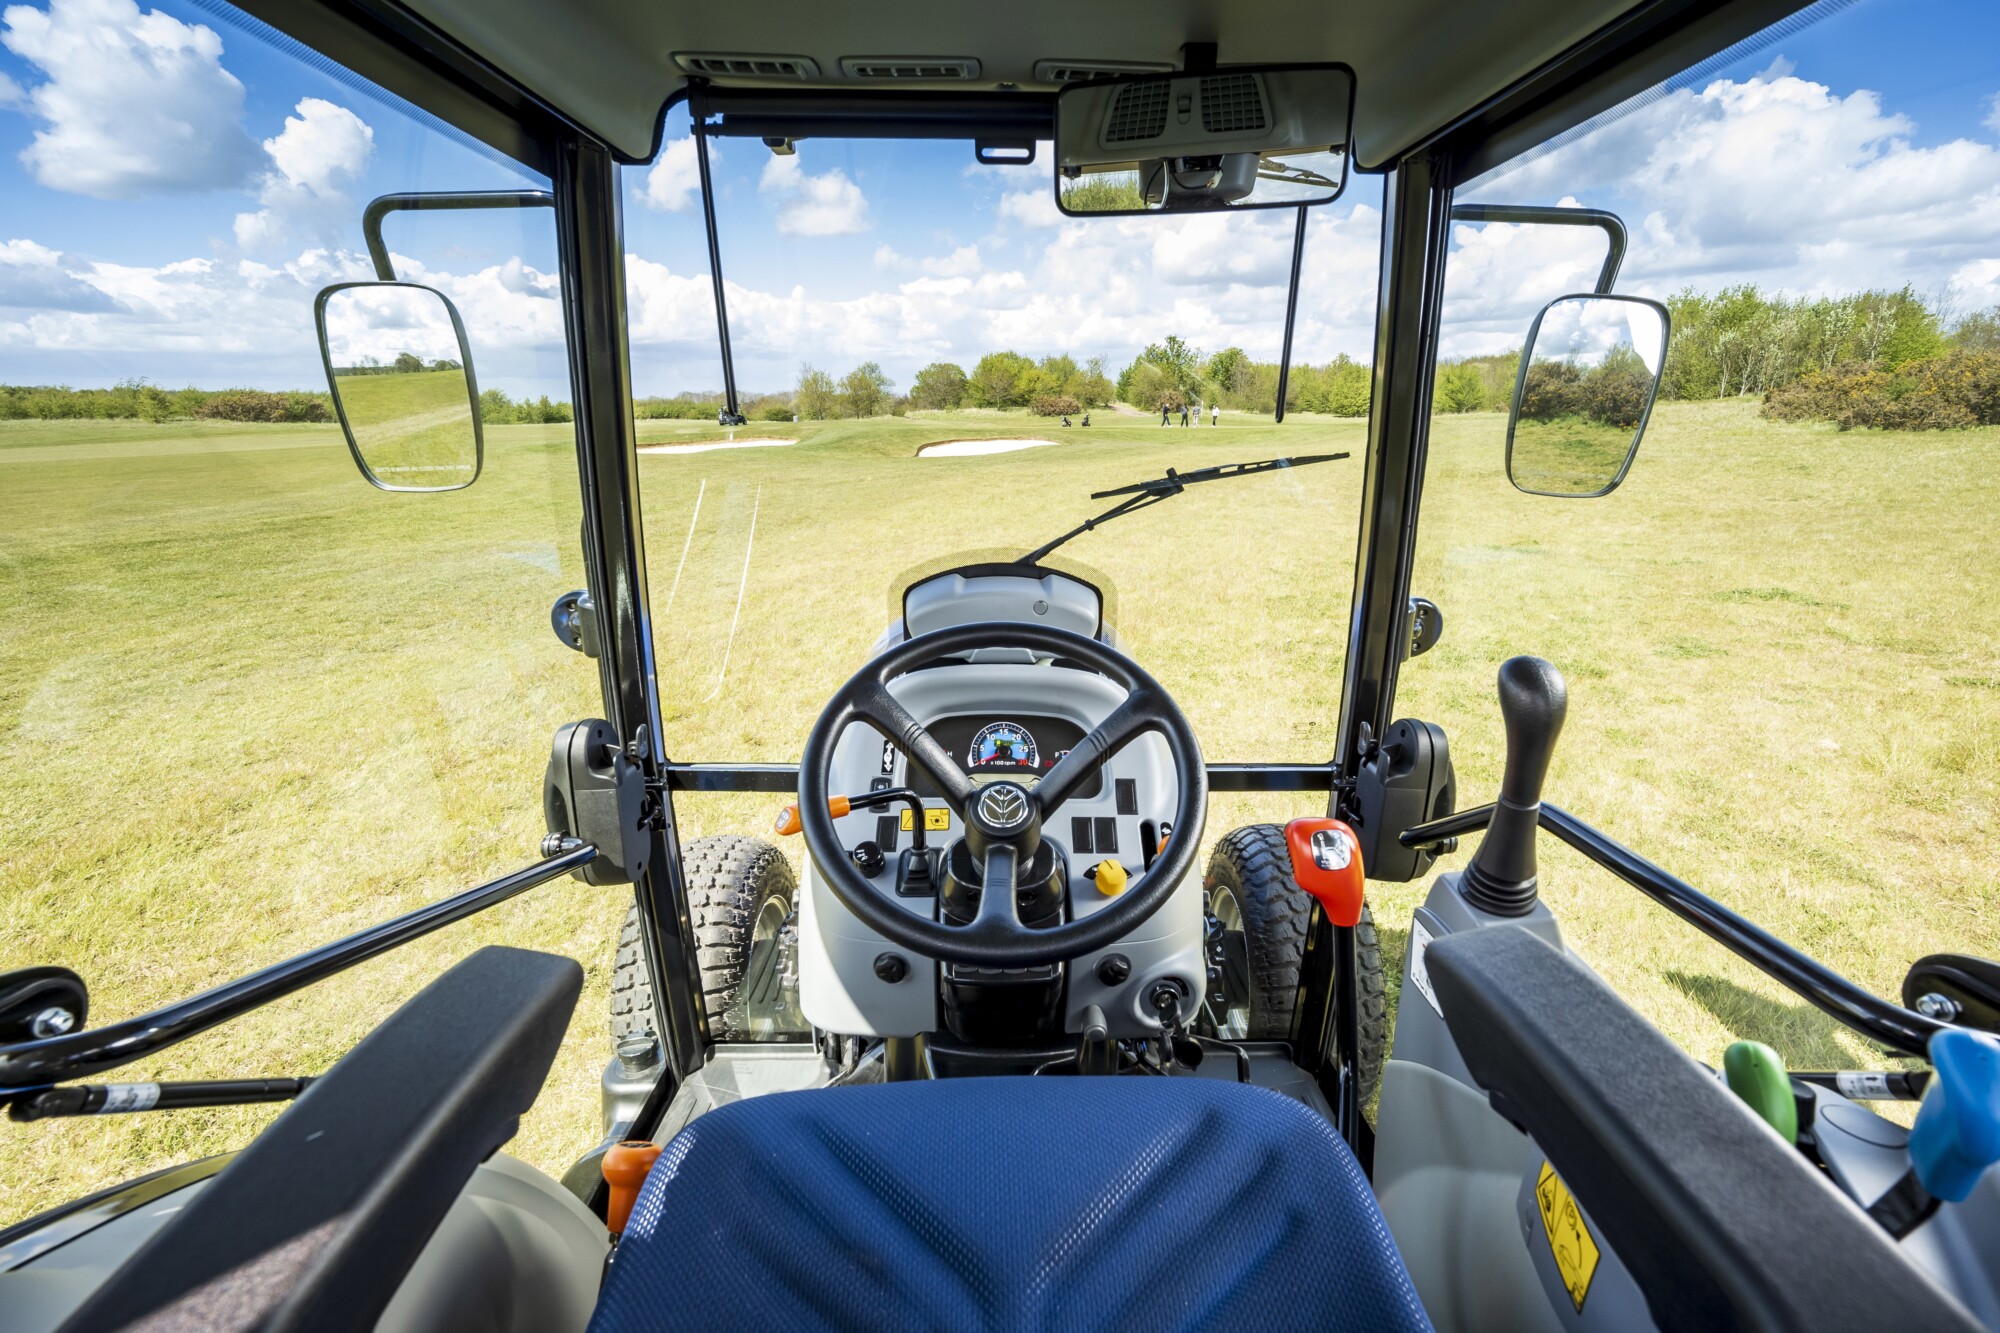 View from the cab of a tractor looking onto the field